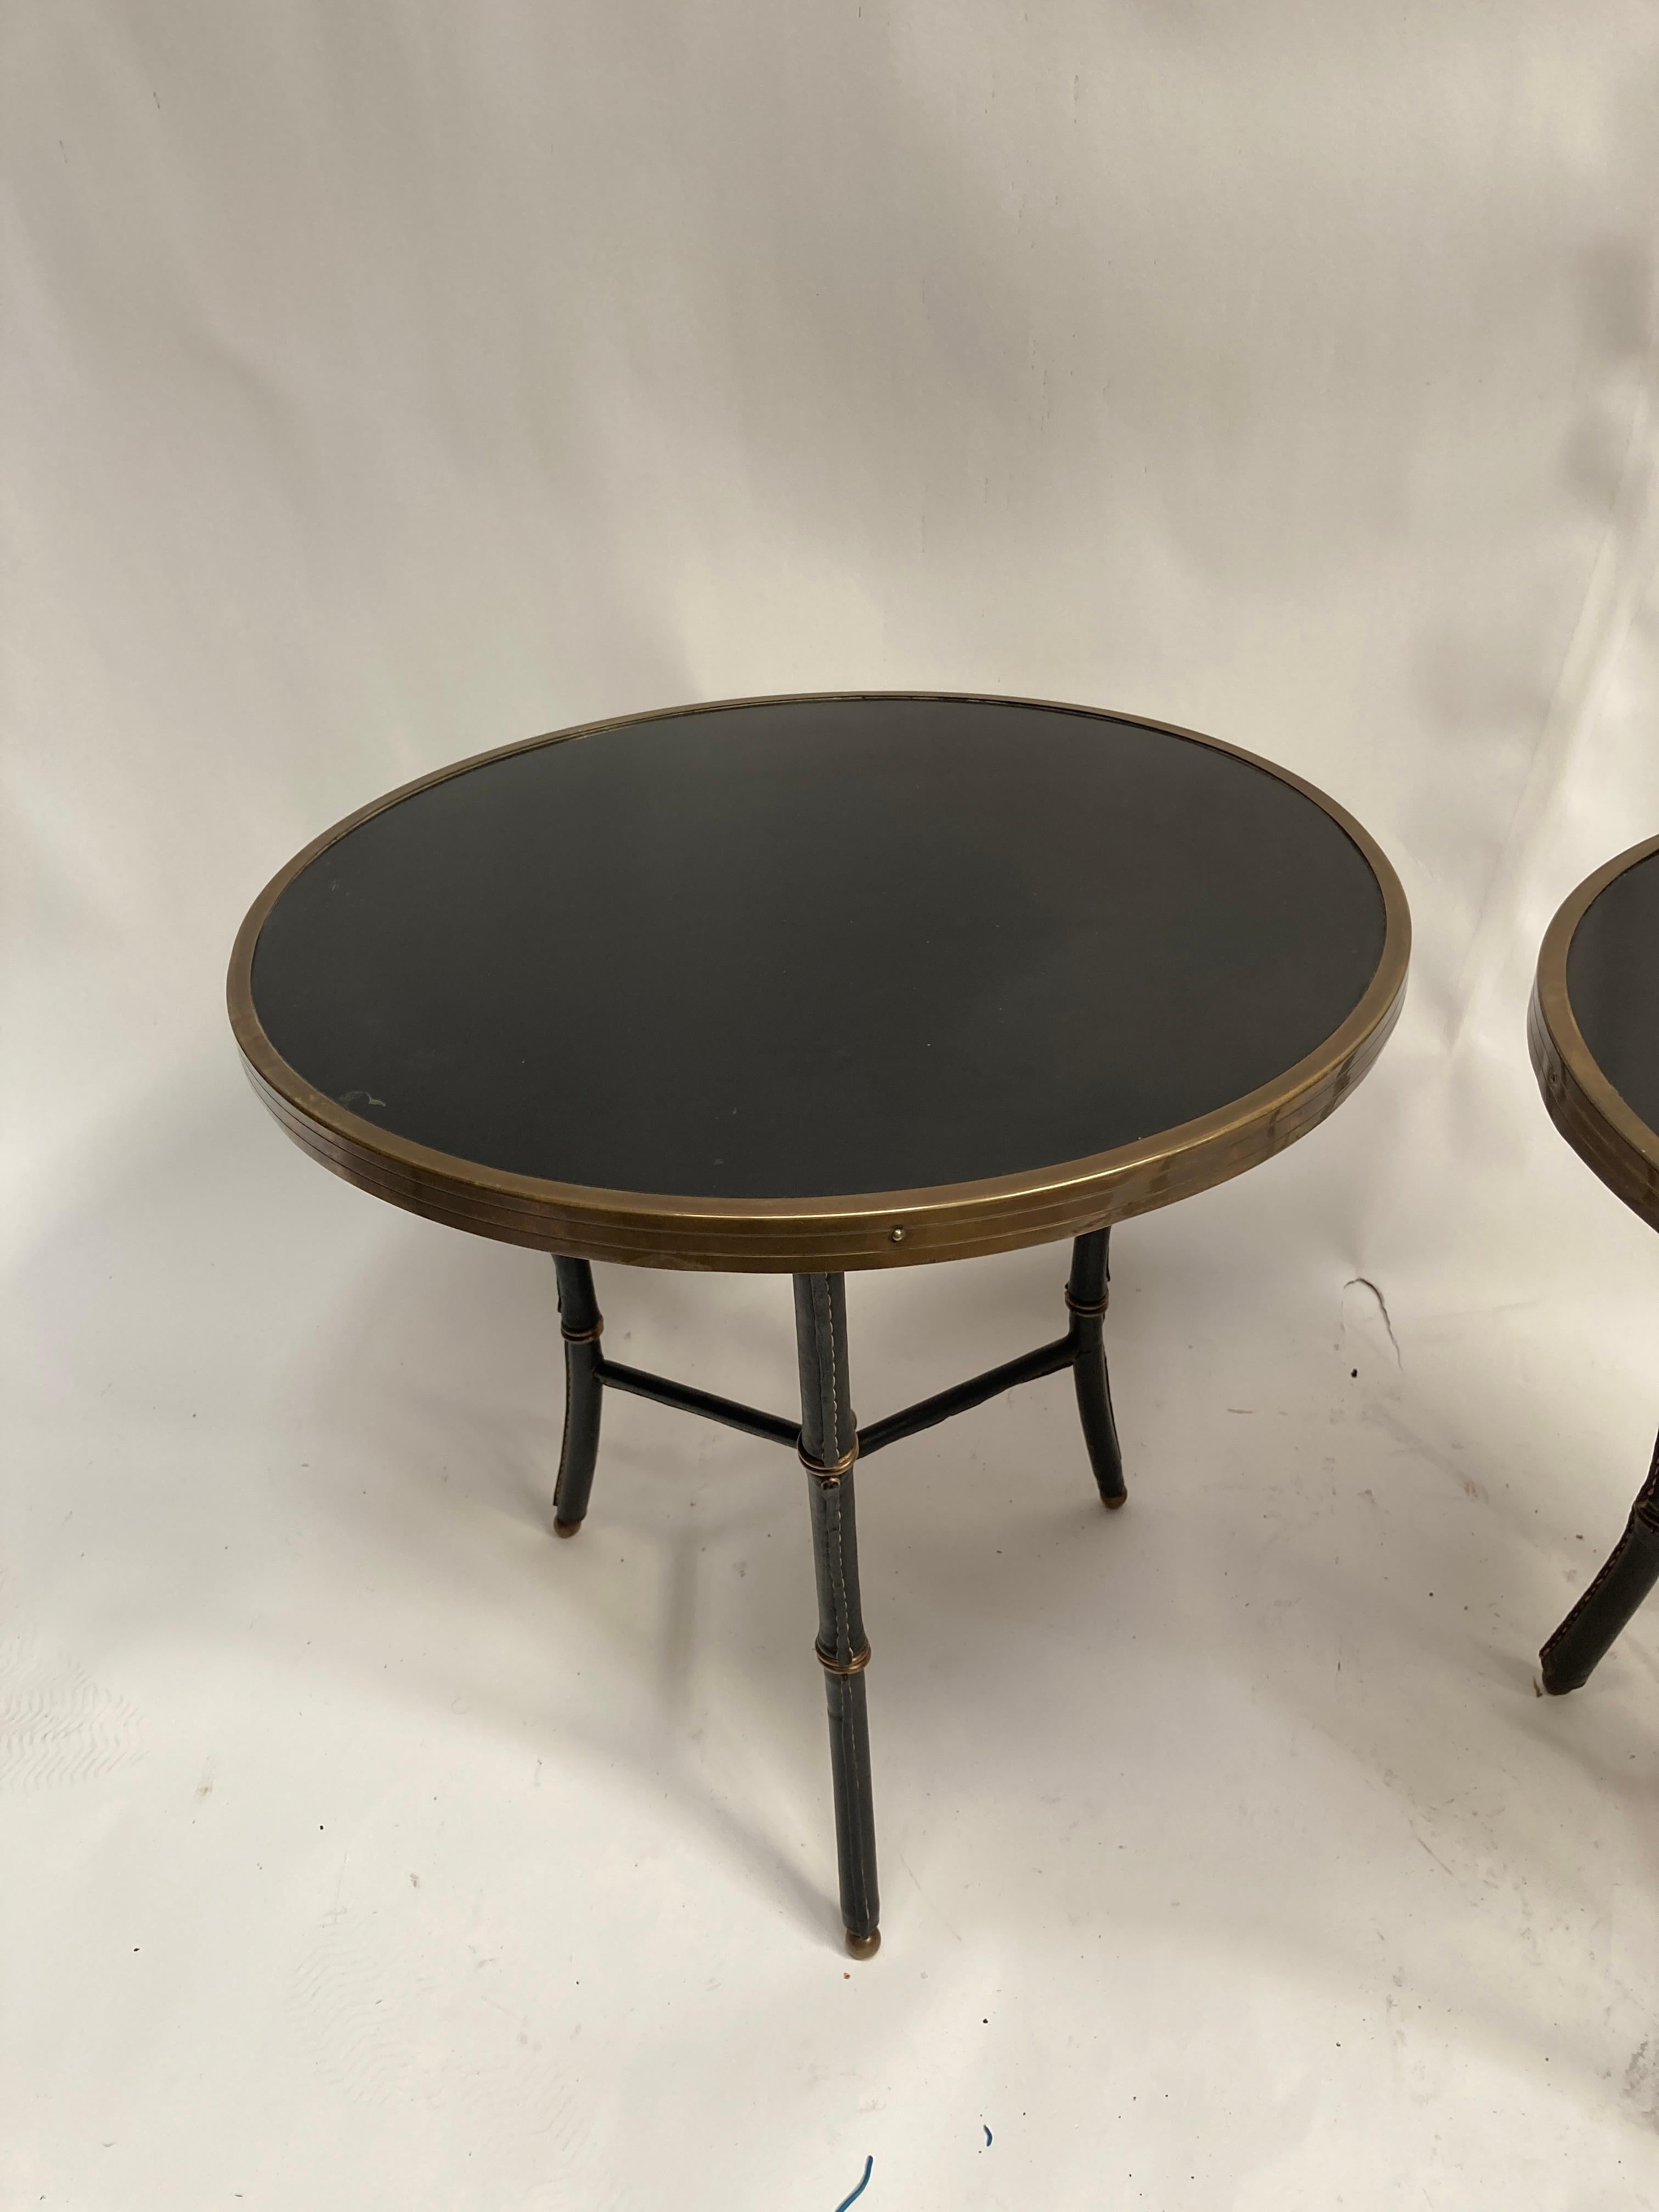 Pair of 1950's Stitched leather side table by Jacques Adnet
Formica top
